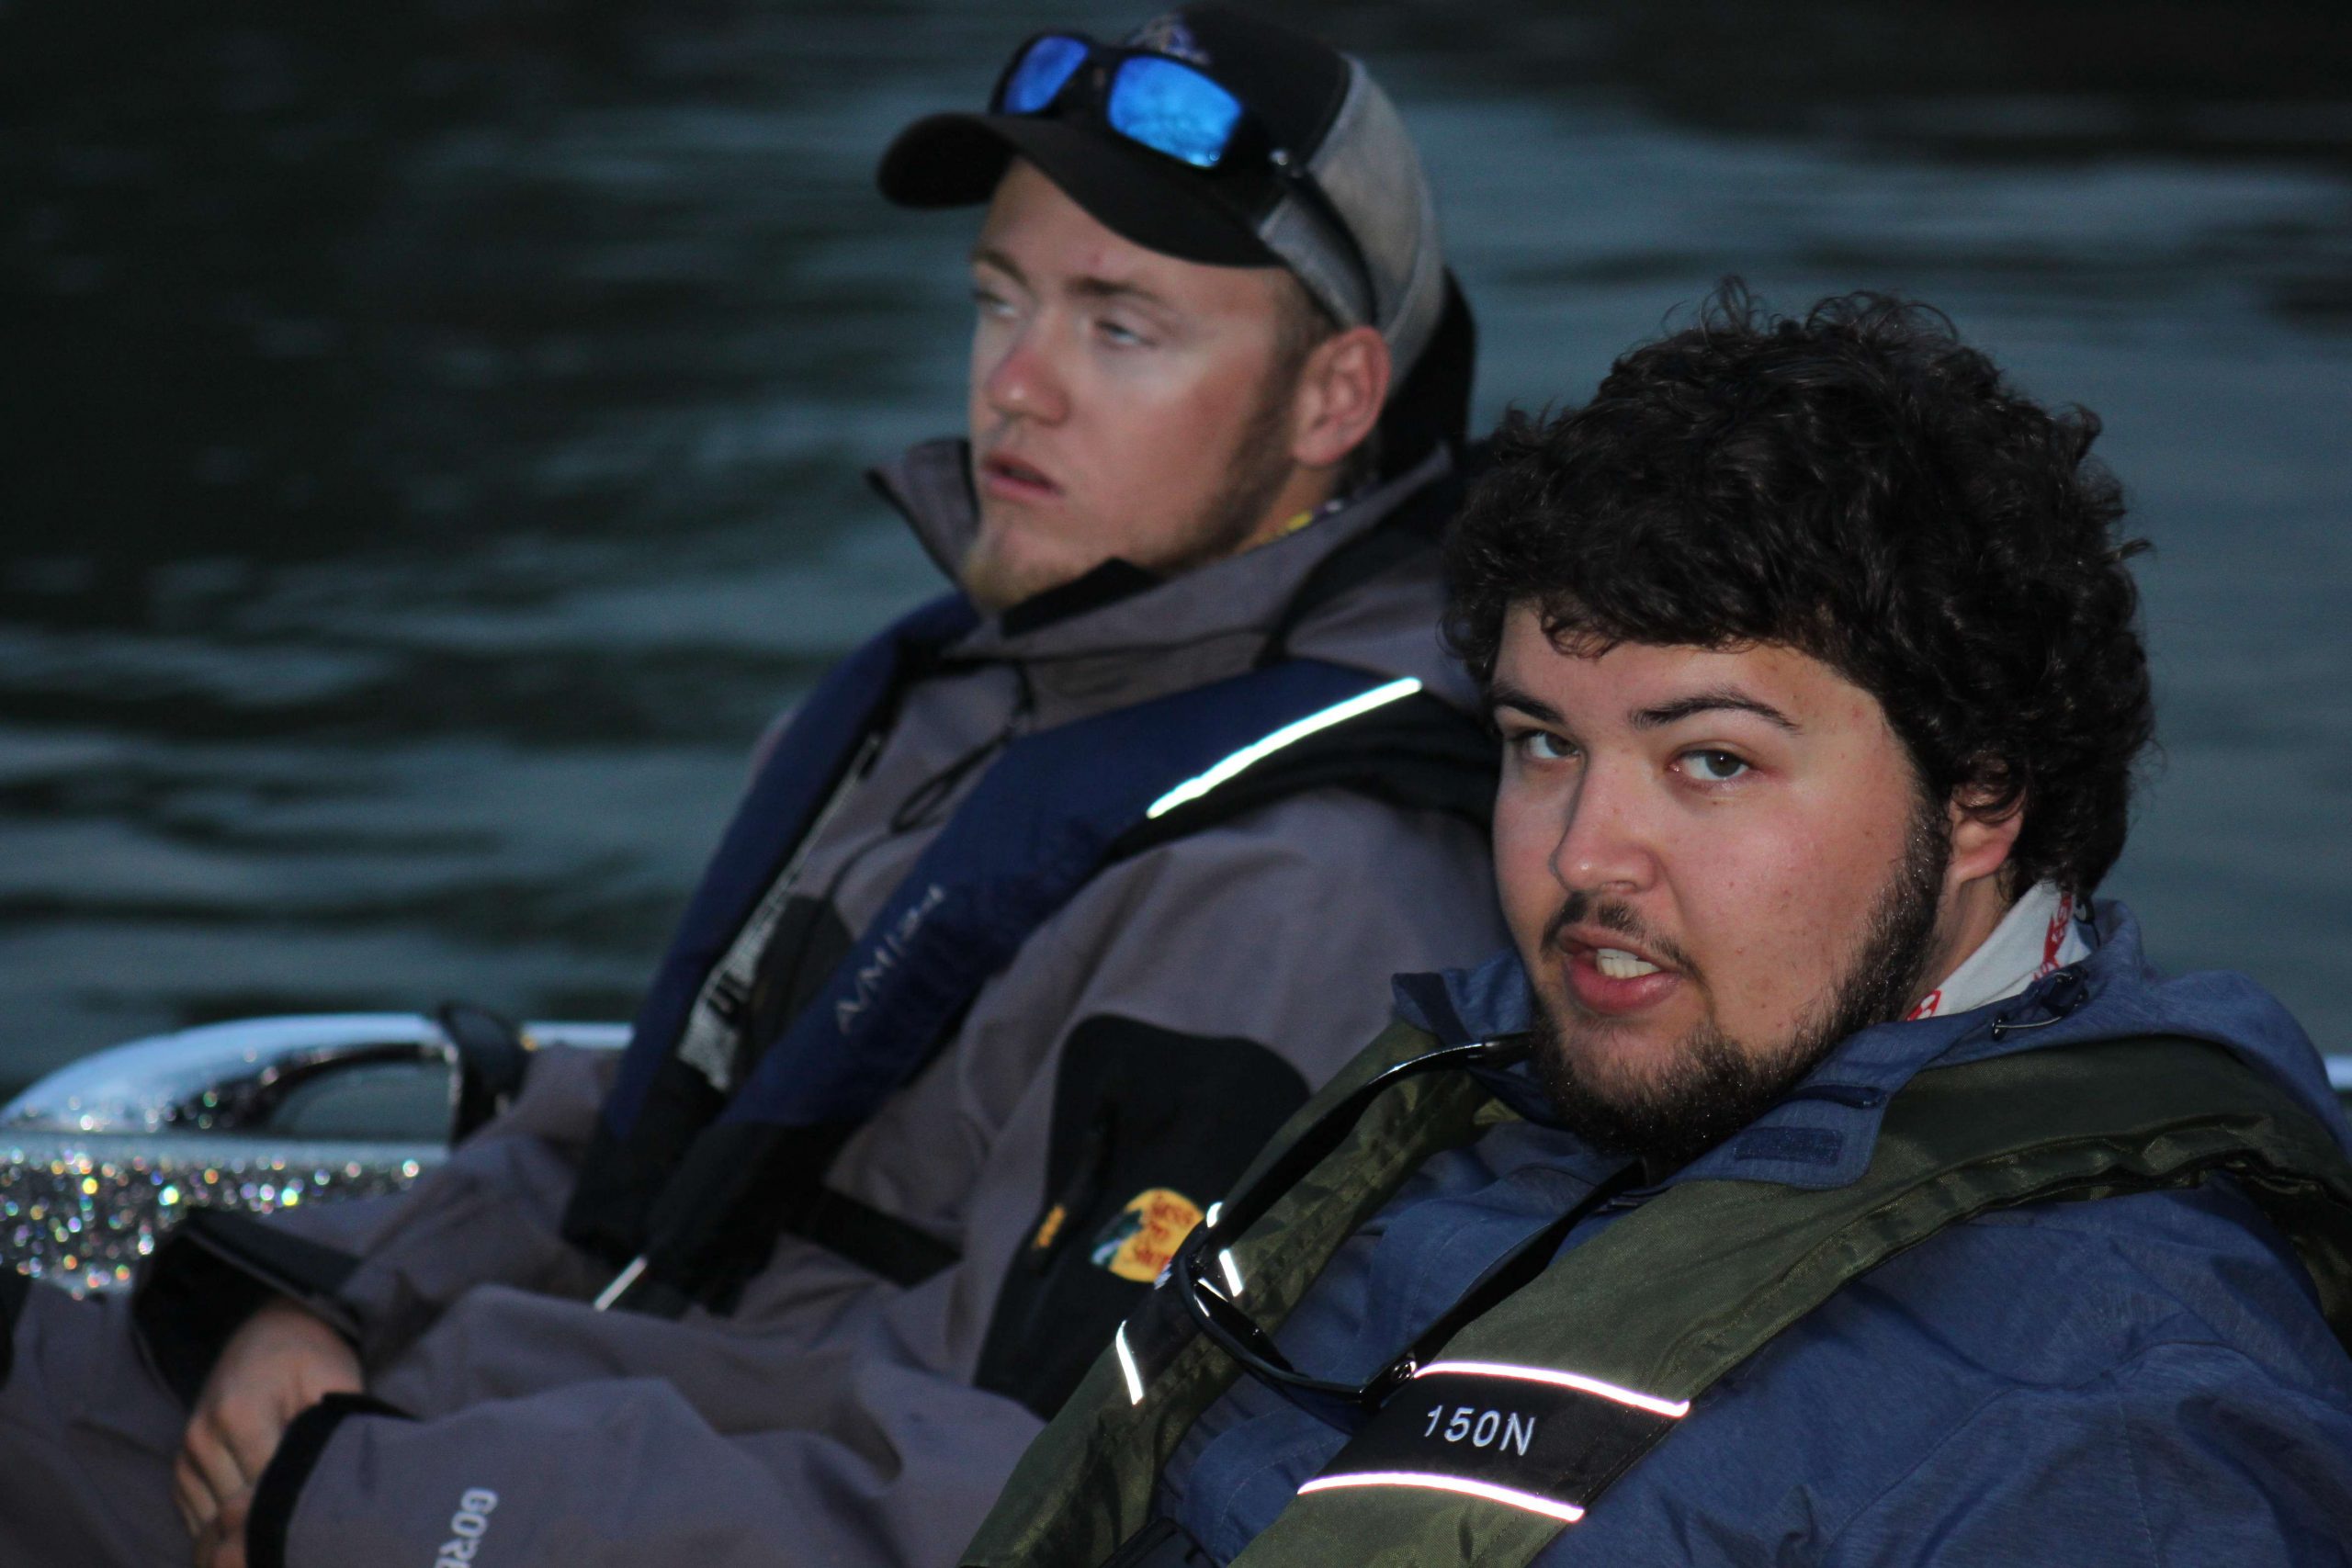 Blake Miles and Cooper Casillas on Boat 4.